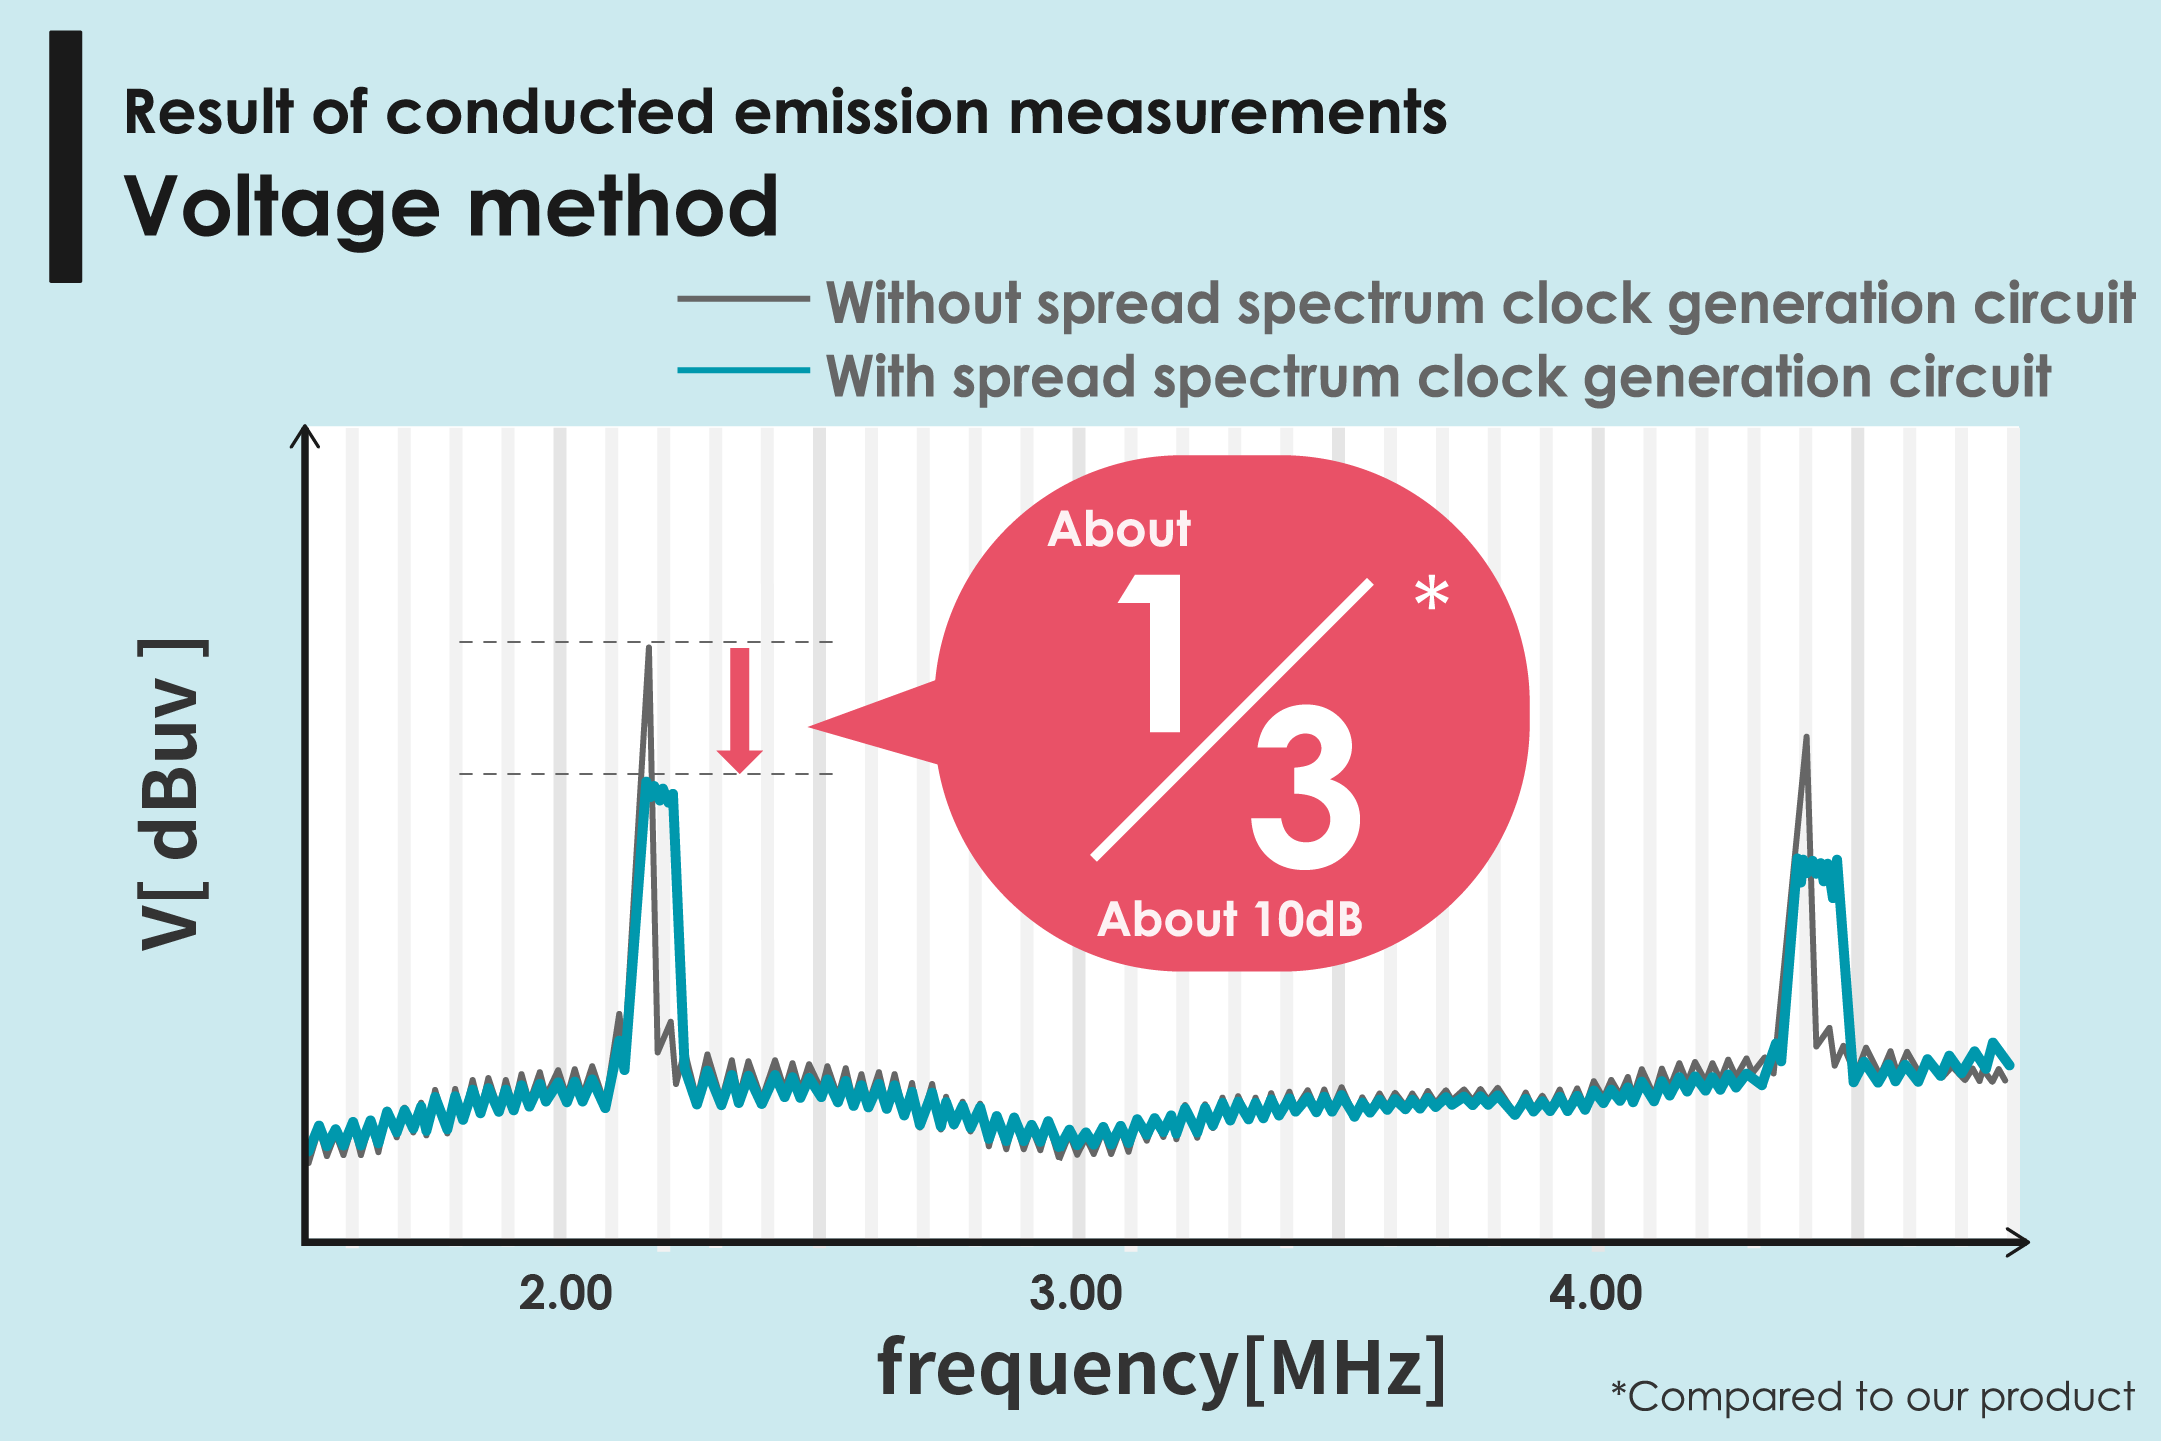 S-19914/15: Conducted emission measurement result